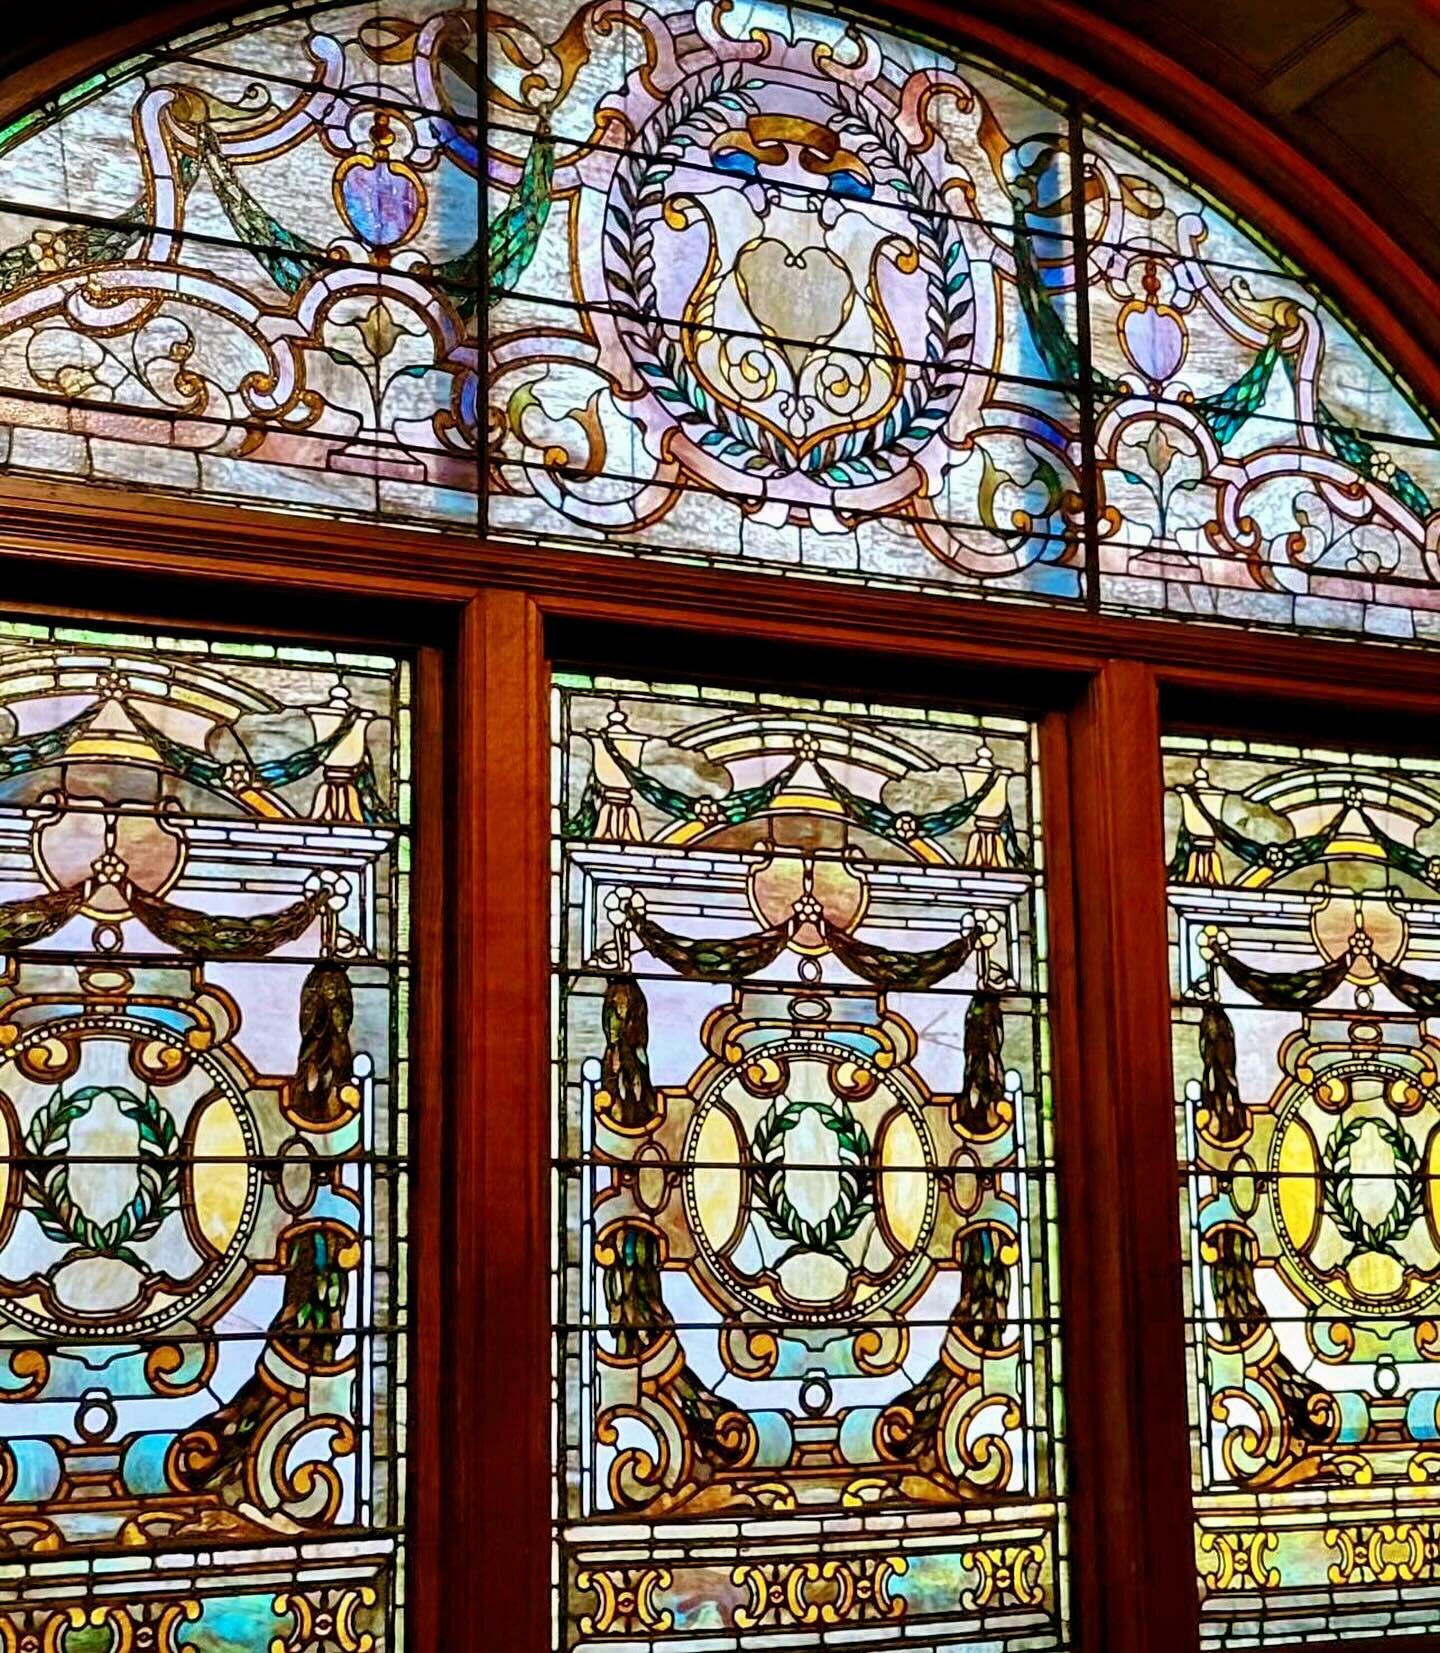 Easter Reservations are available!  Book Brunch and Dinner reservations now at: www.thewhitney.com.  #tiffanyglass